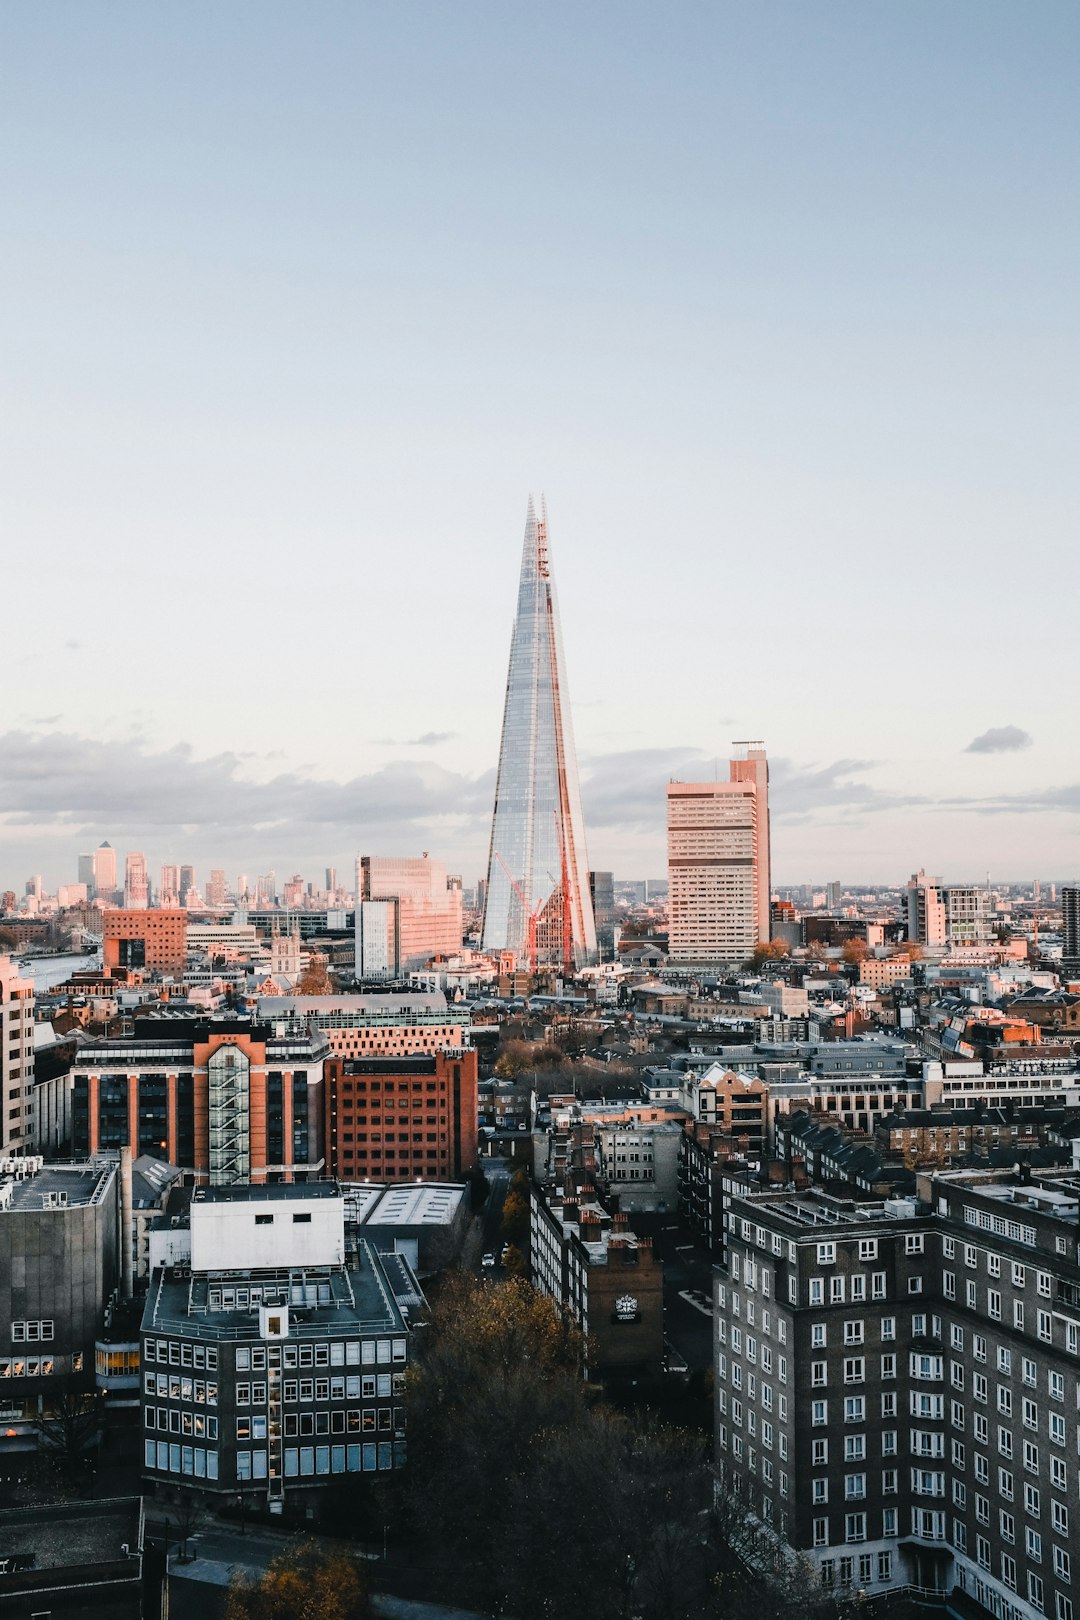 Travel Tips and Stories of The Shard in United Kingdom